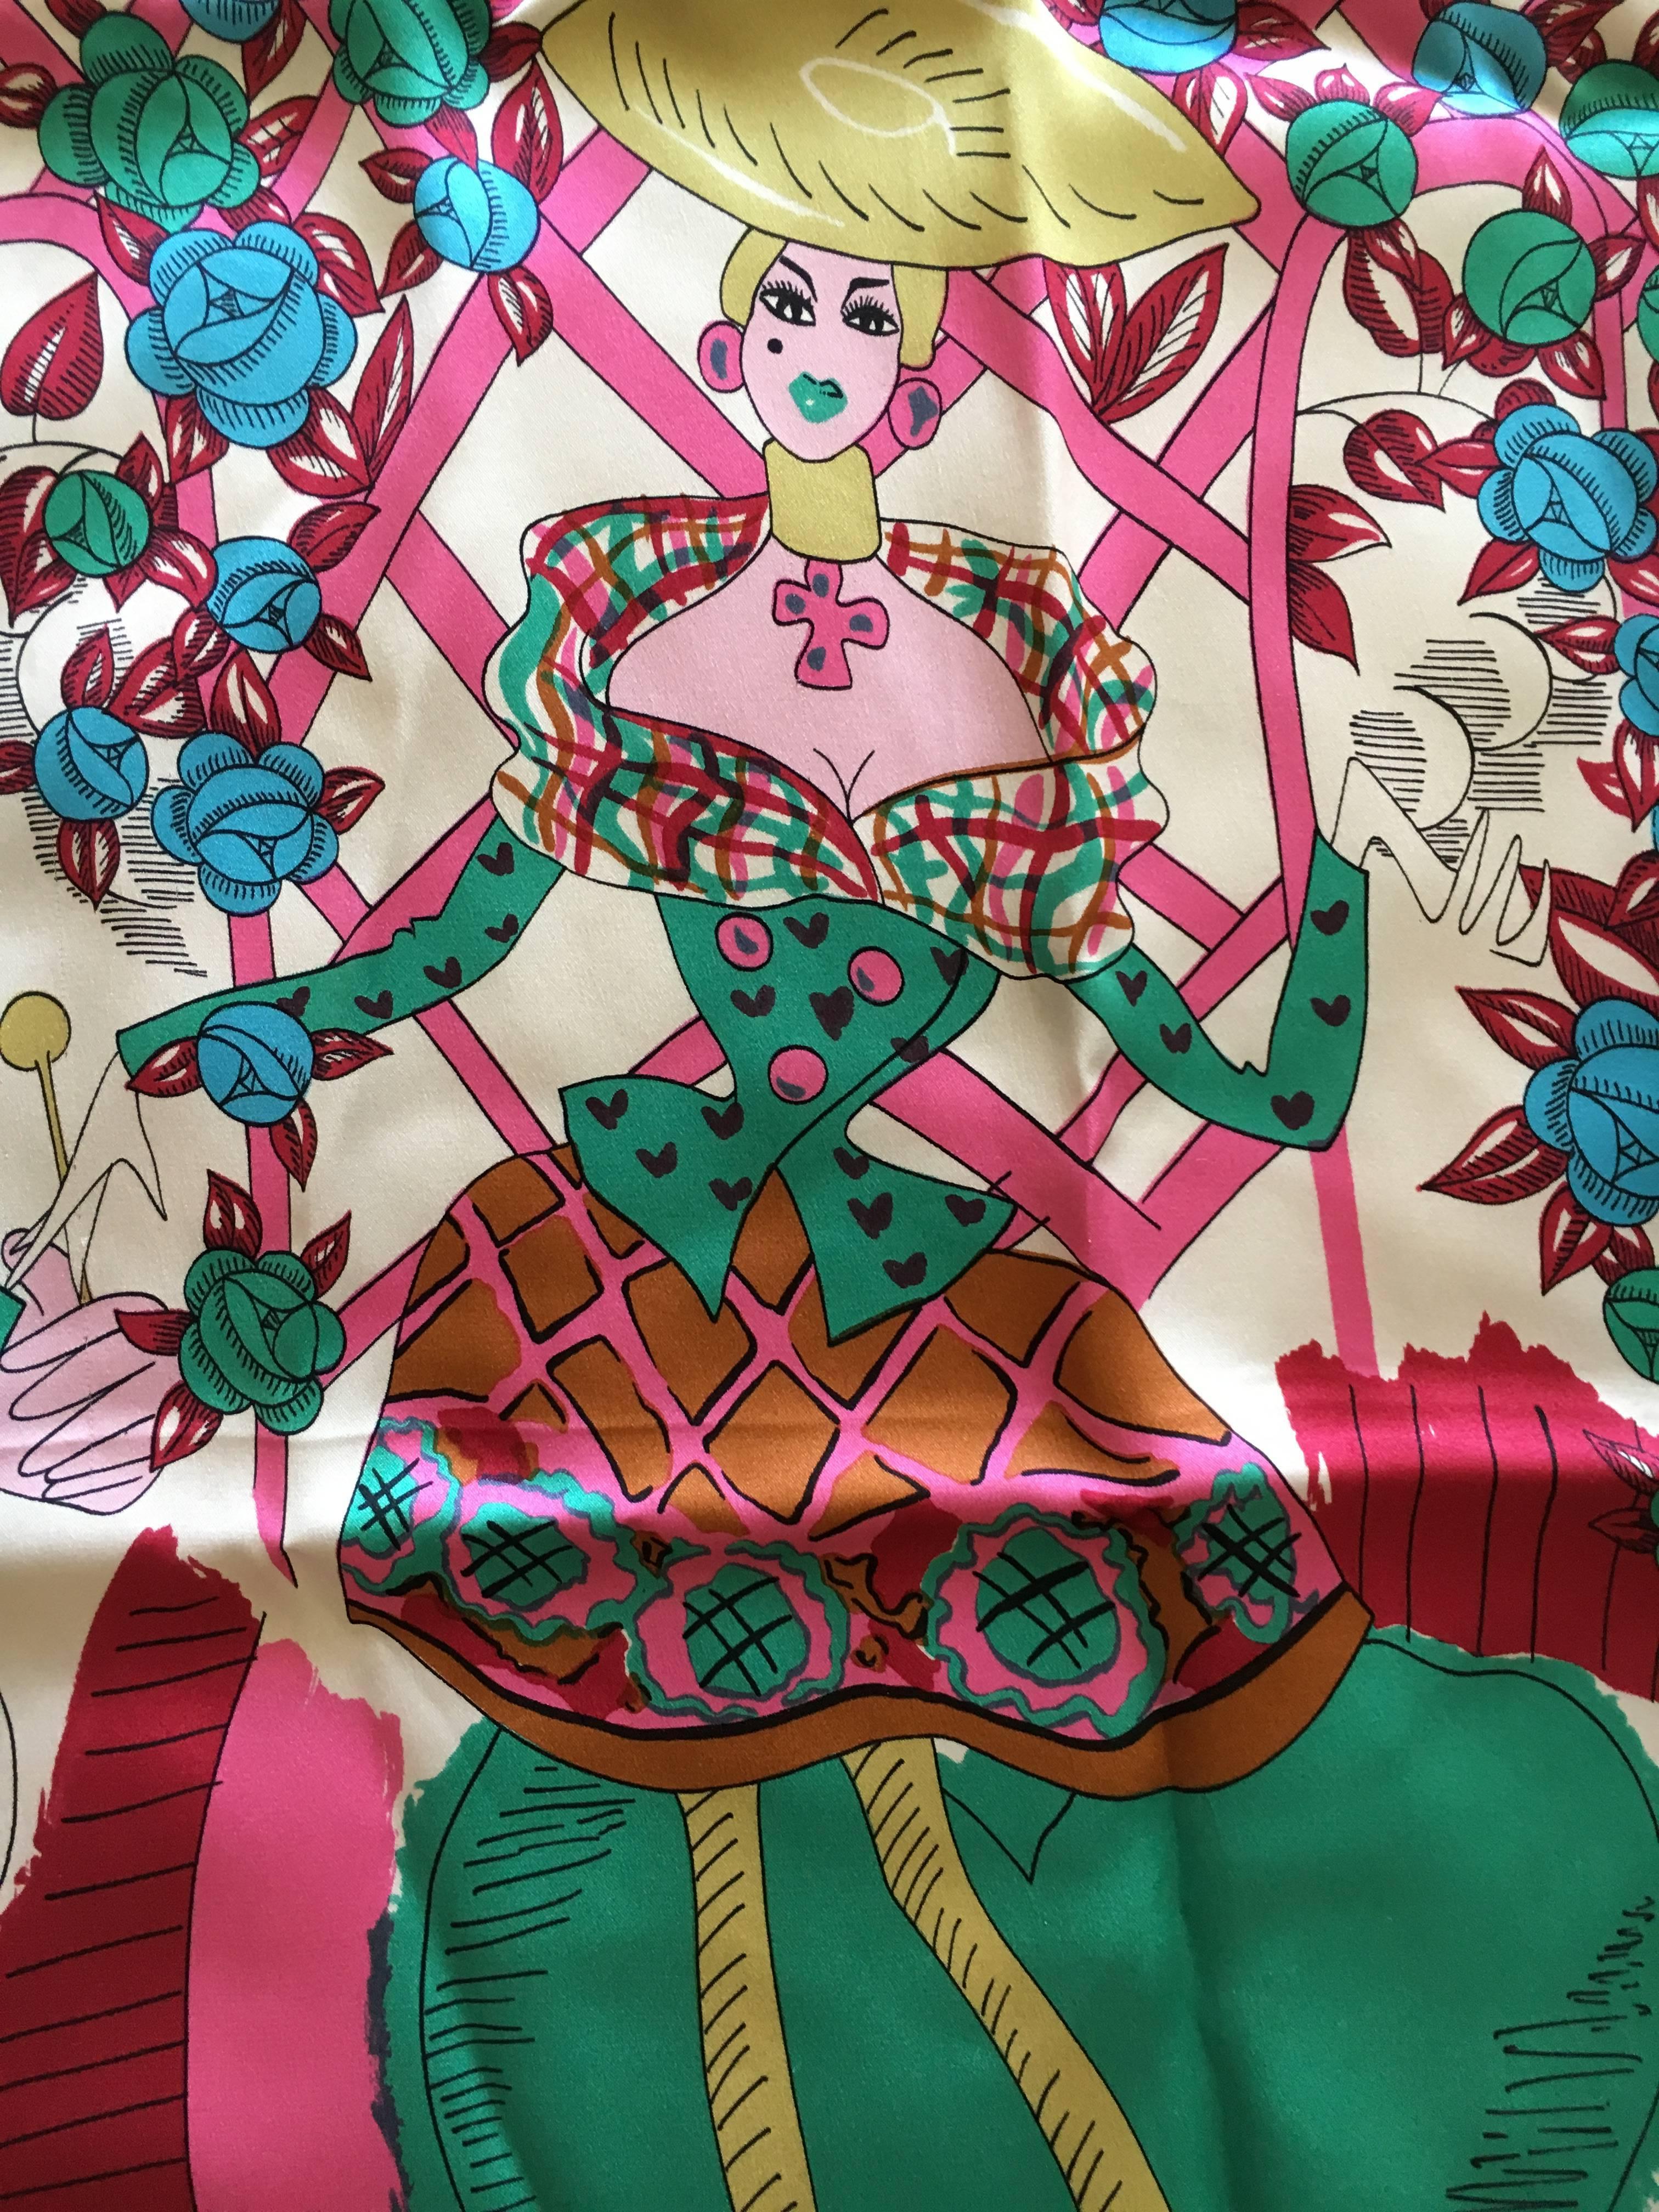 Christian Lacroix 1980's Witty Silk Fashion Scene Silk Scarf  with a Drawing by Lacroix.
Lacroix's illustration and fashion drawings are always so delightful.
35" square.